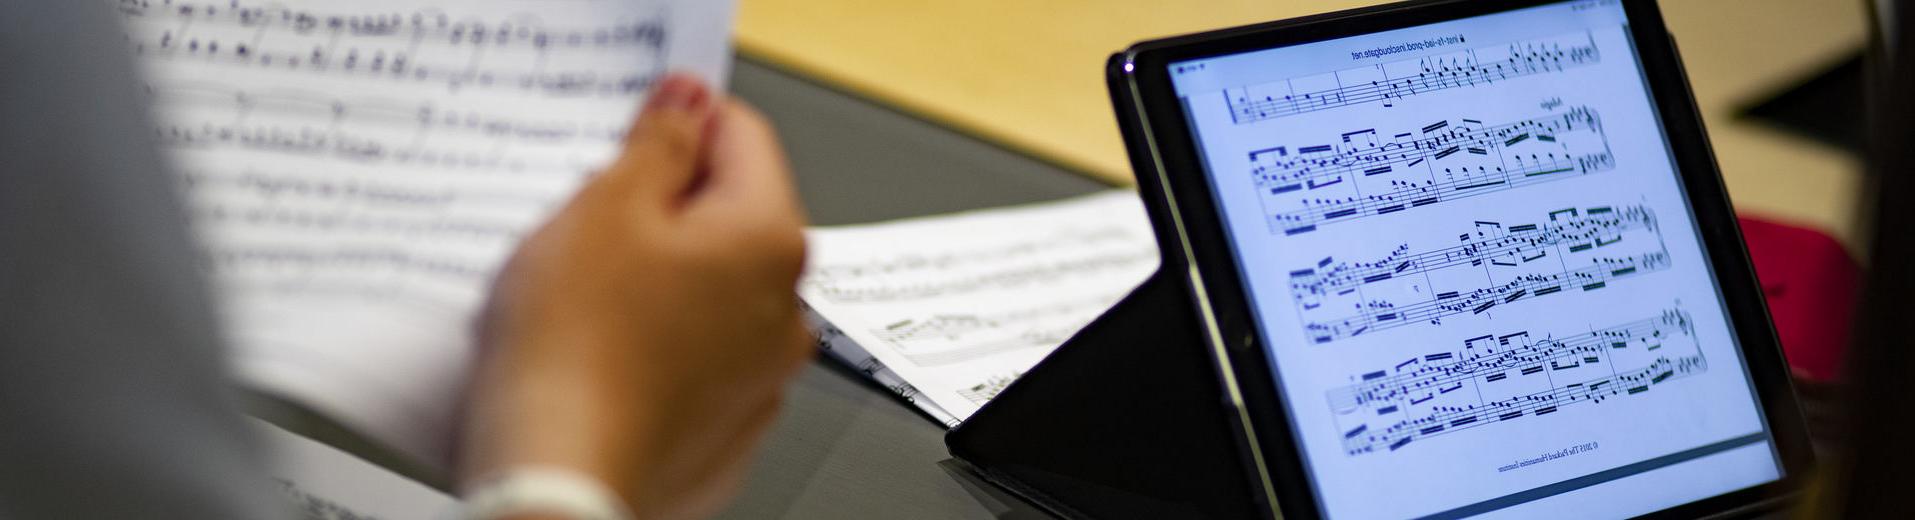 One student looks at a music score on a tablet while another student holds a paper score.